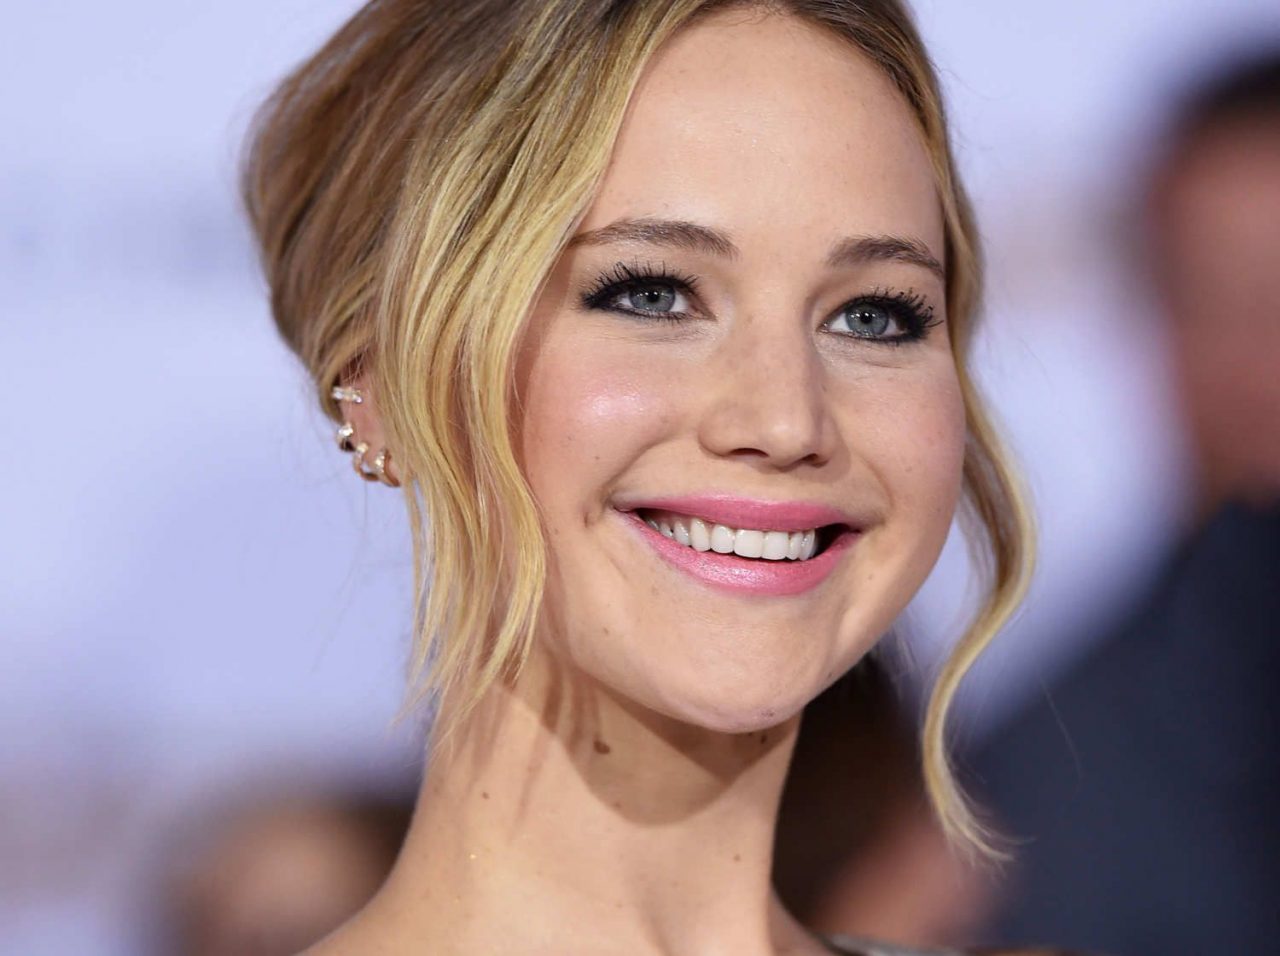 Jennifer Lawrence Photos With Cute Smile